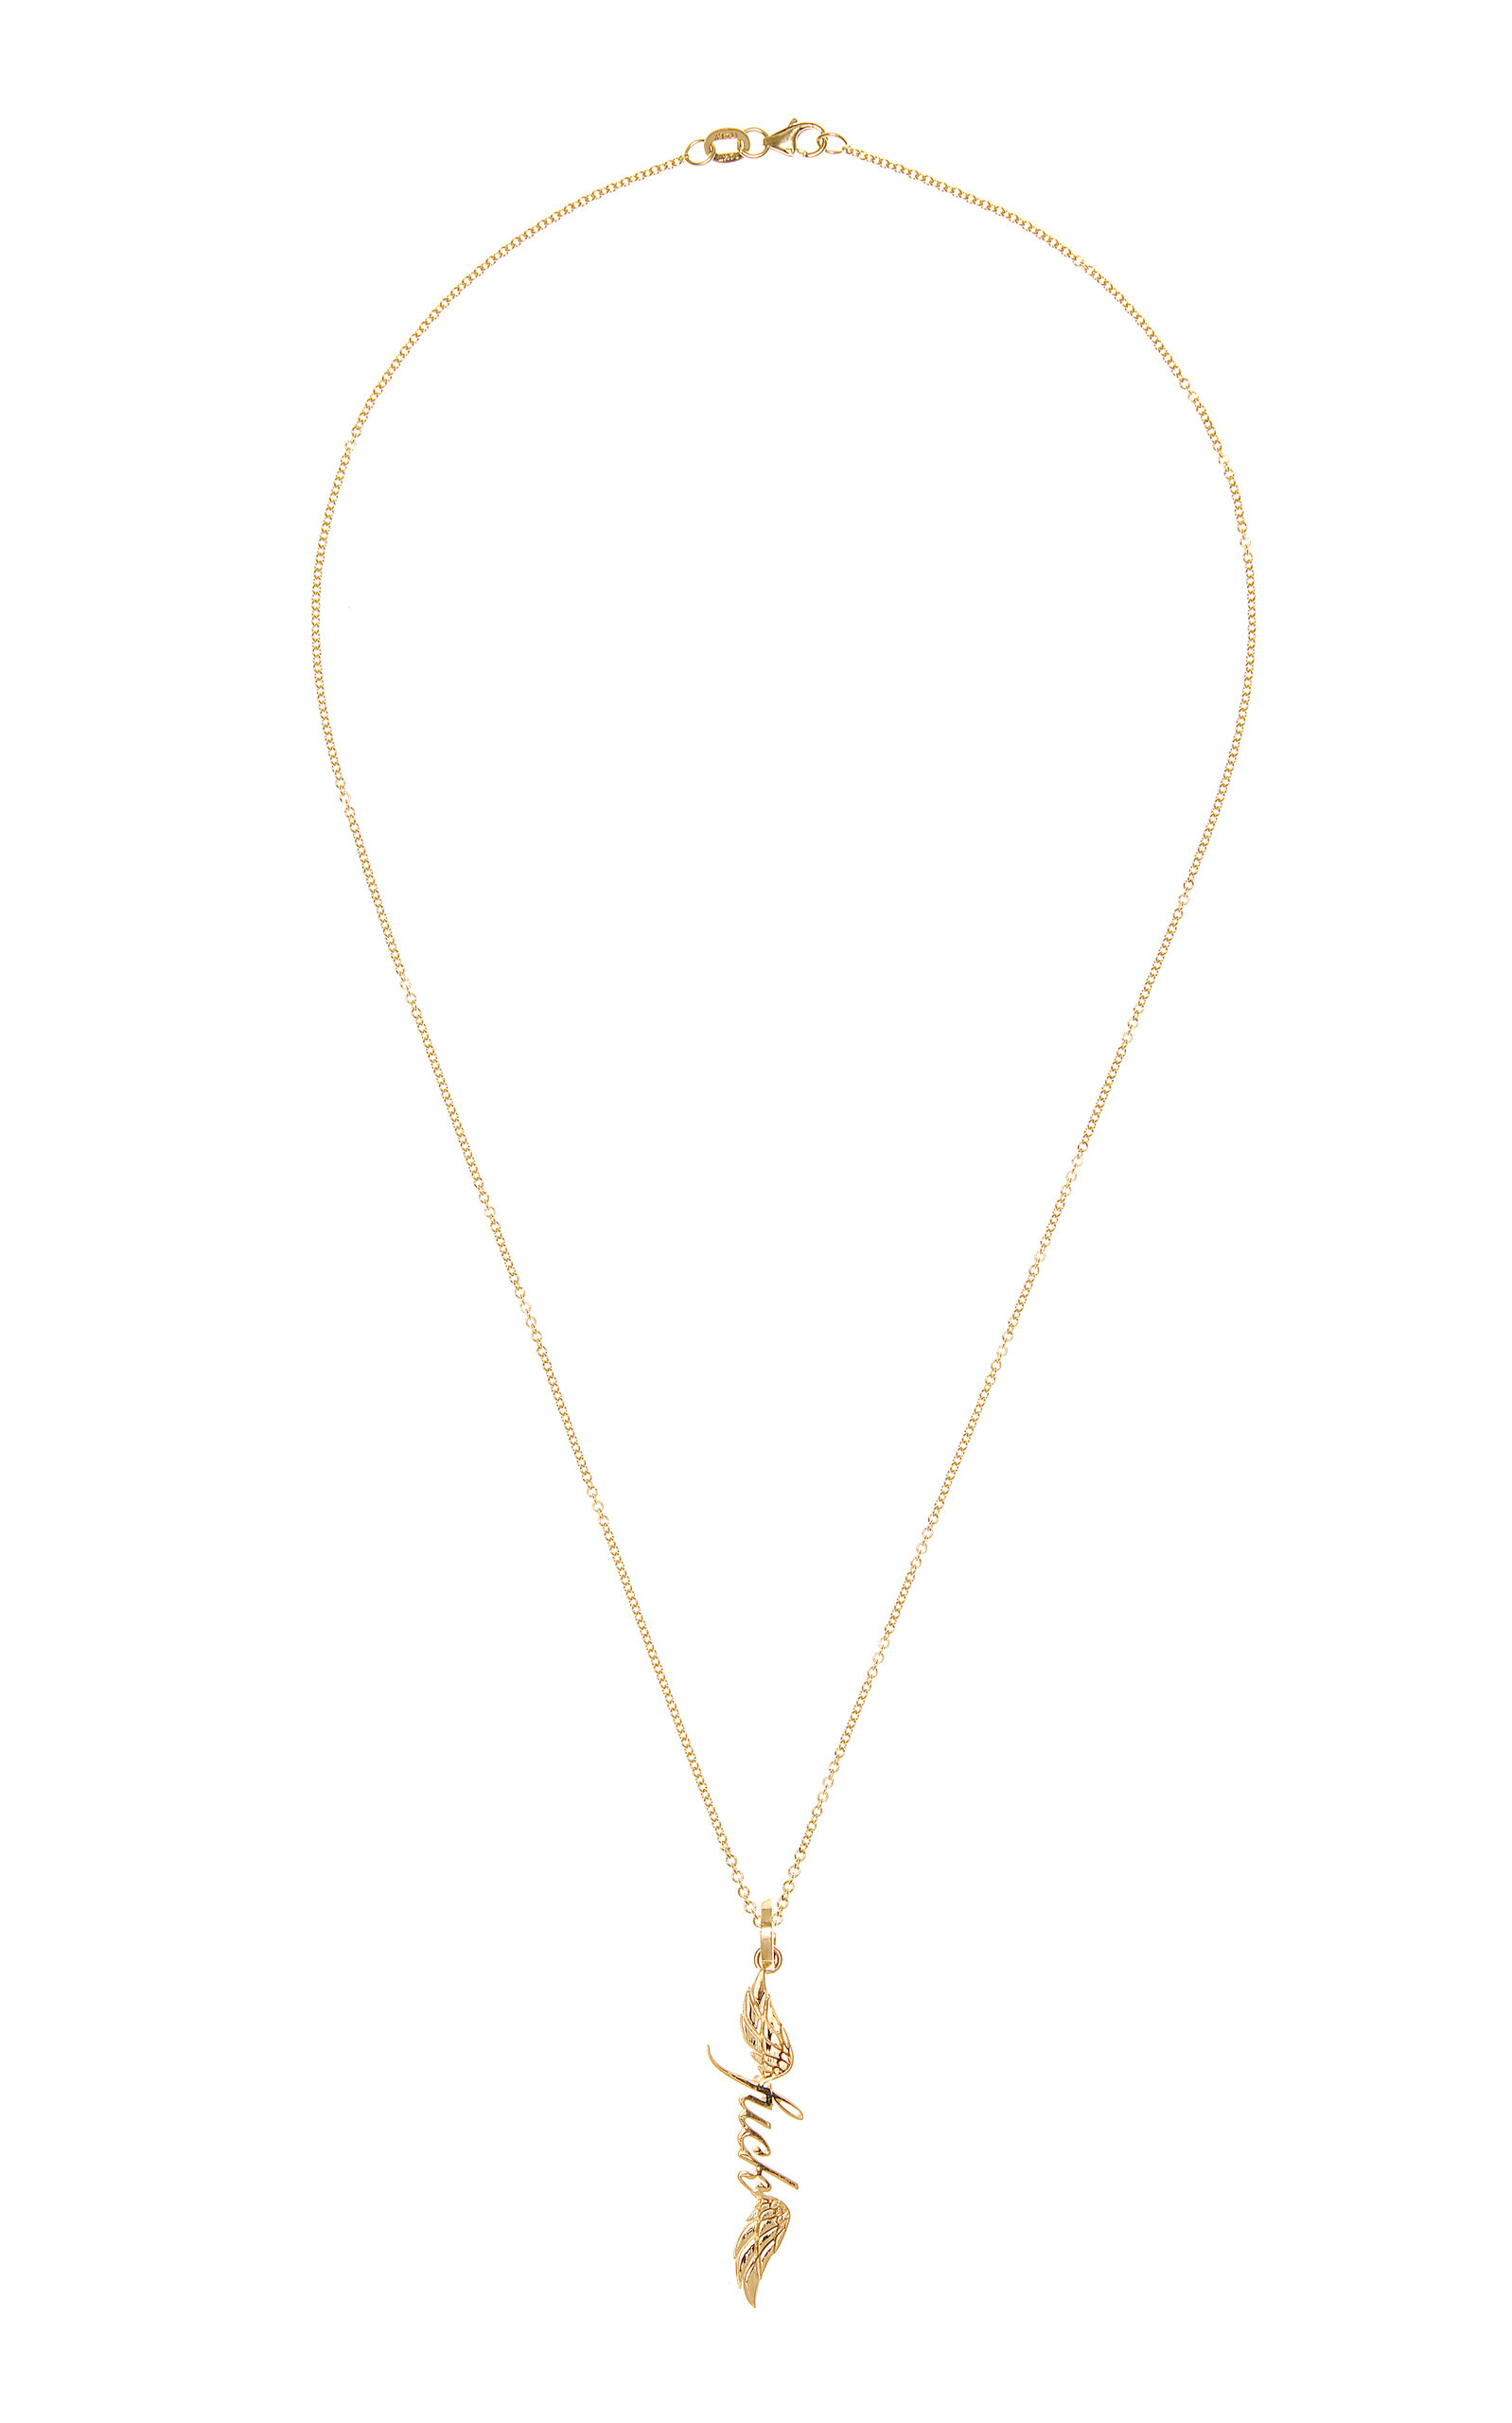 DRU. Women's Flying F*** 14K Yellow Gold Necklace